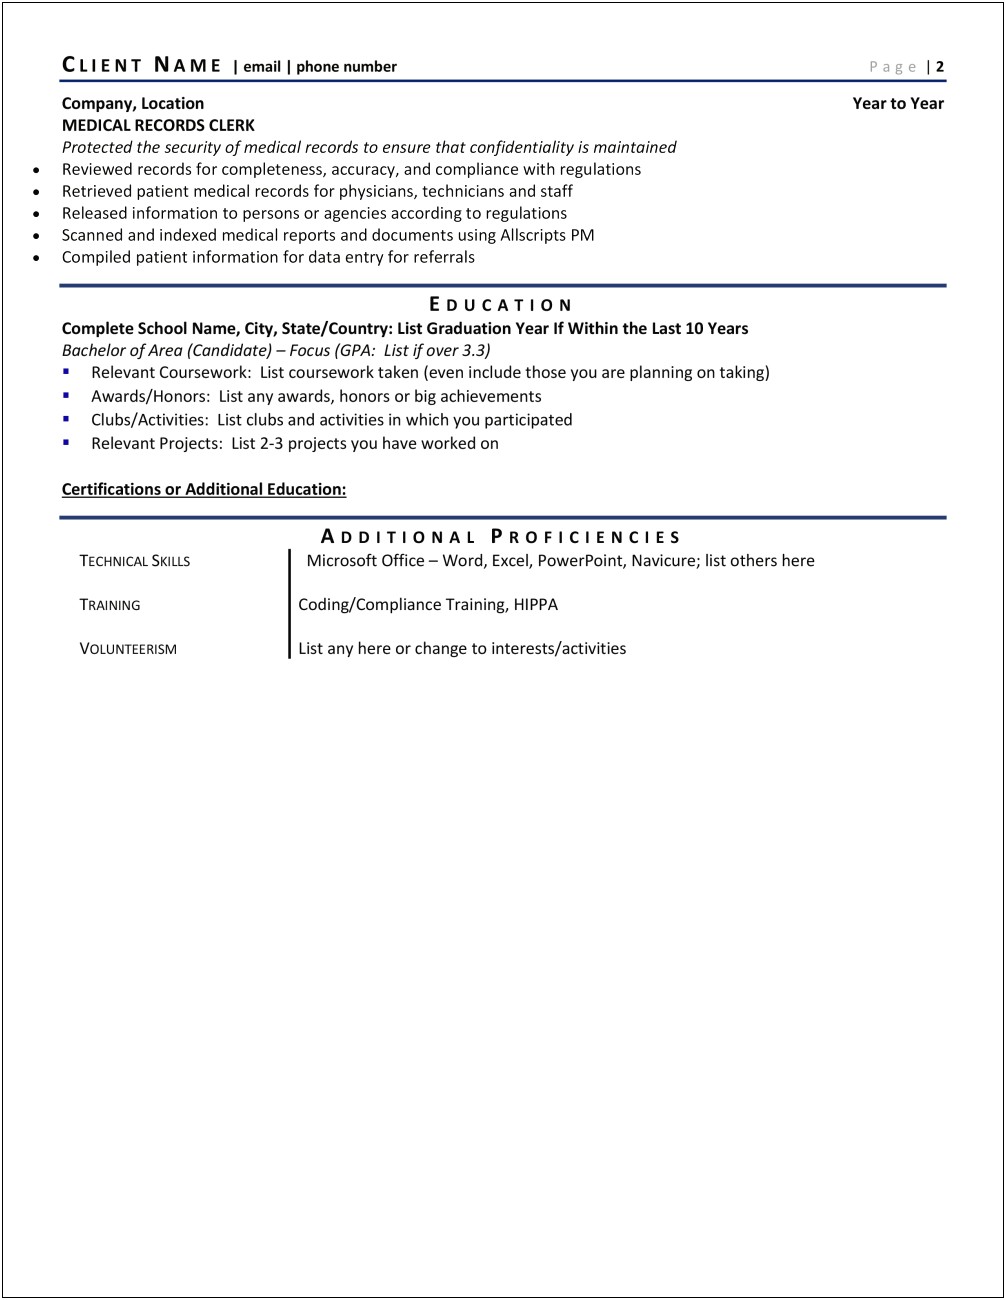 Medical Records Technician Resume Objective